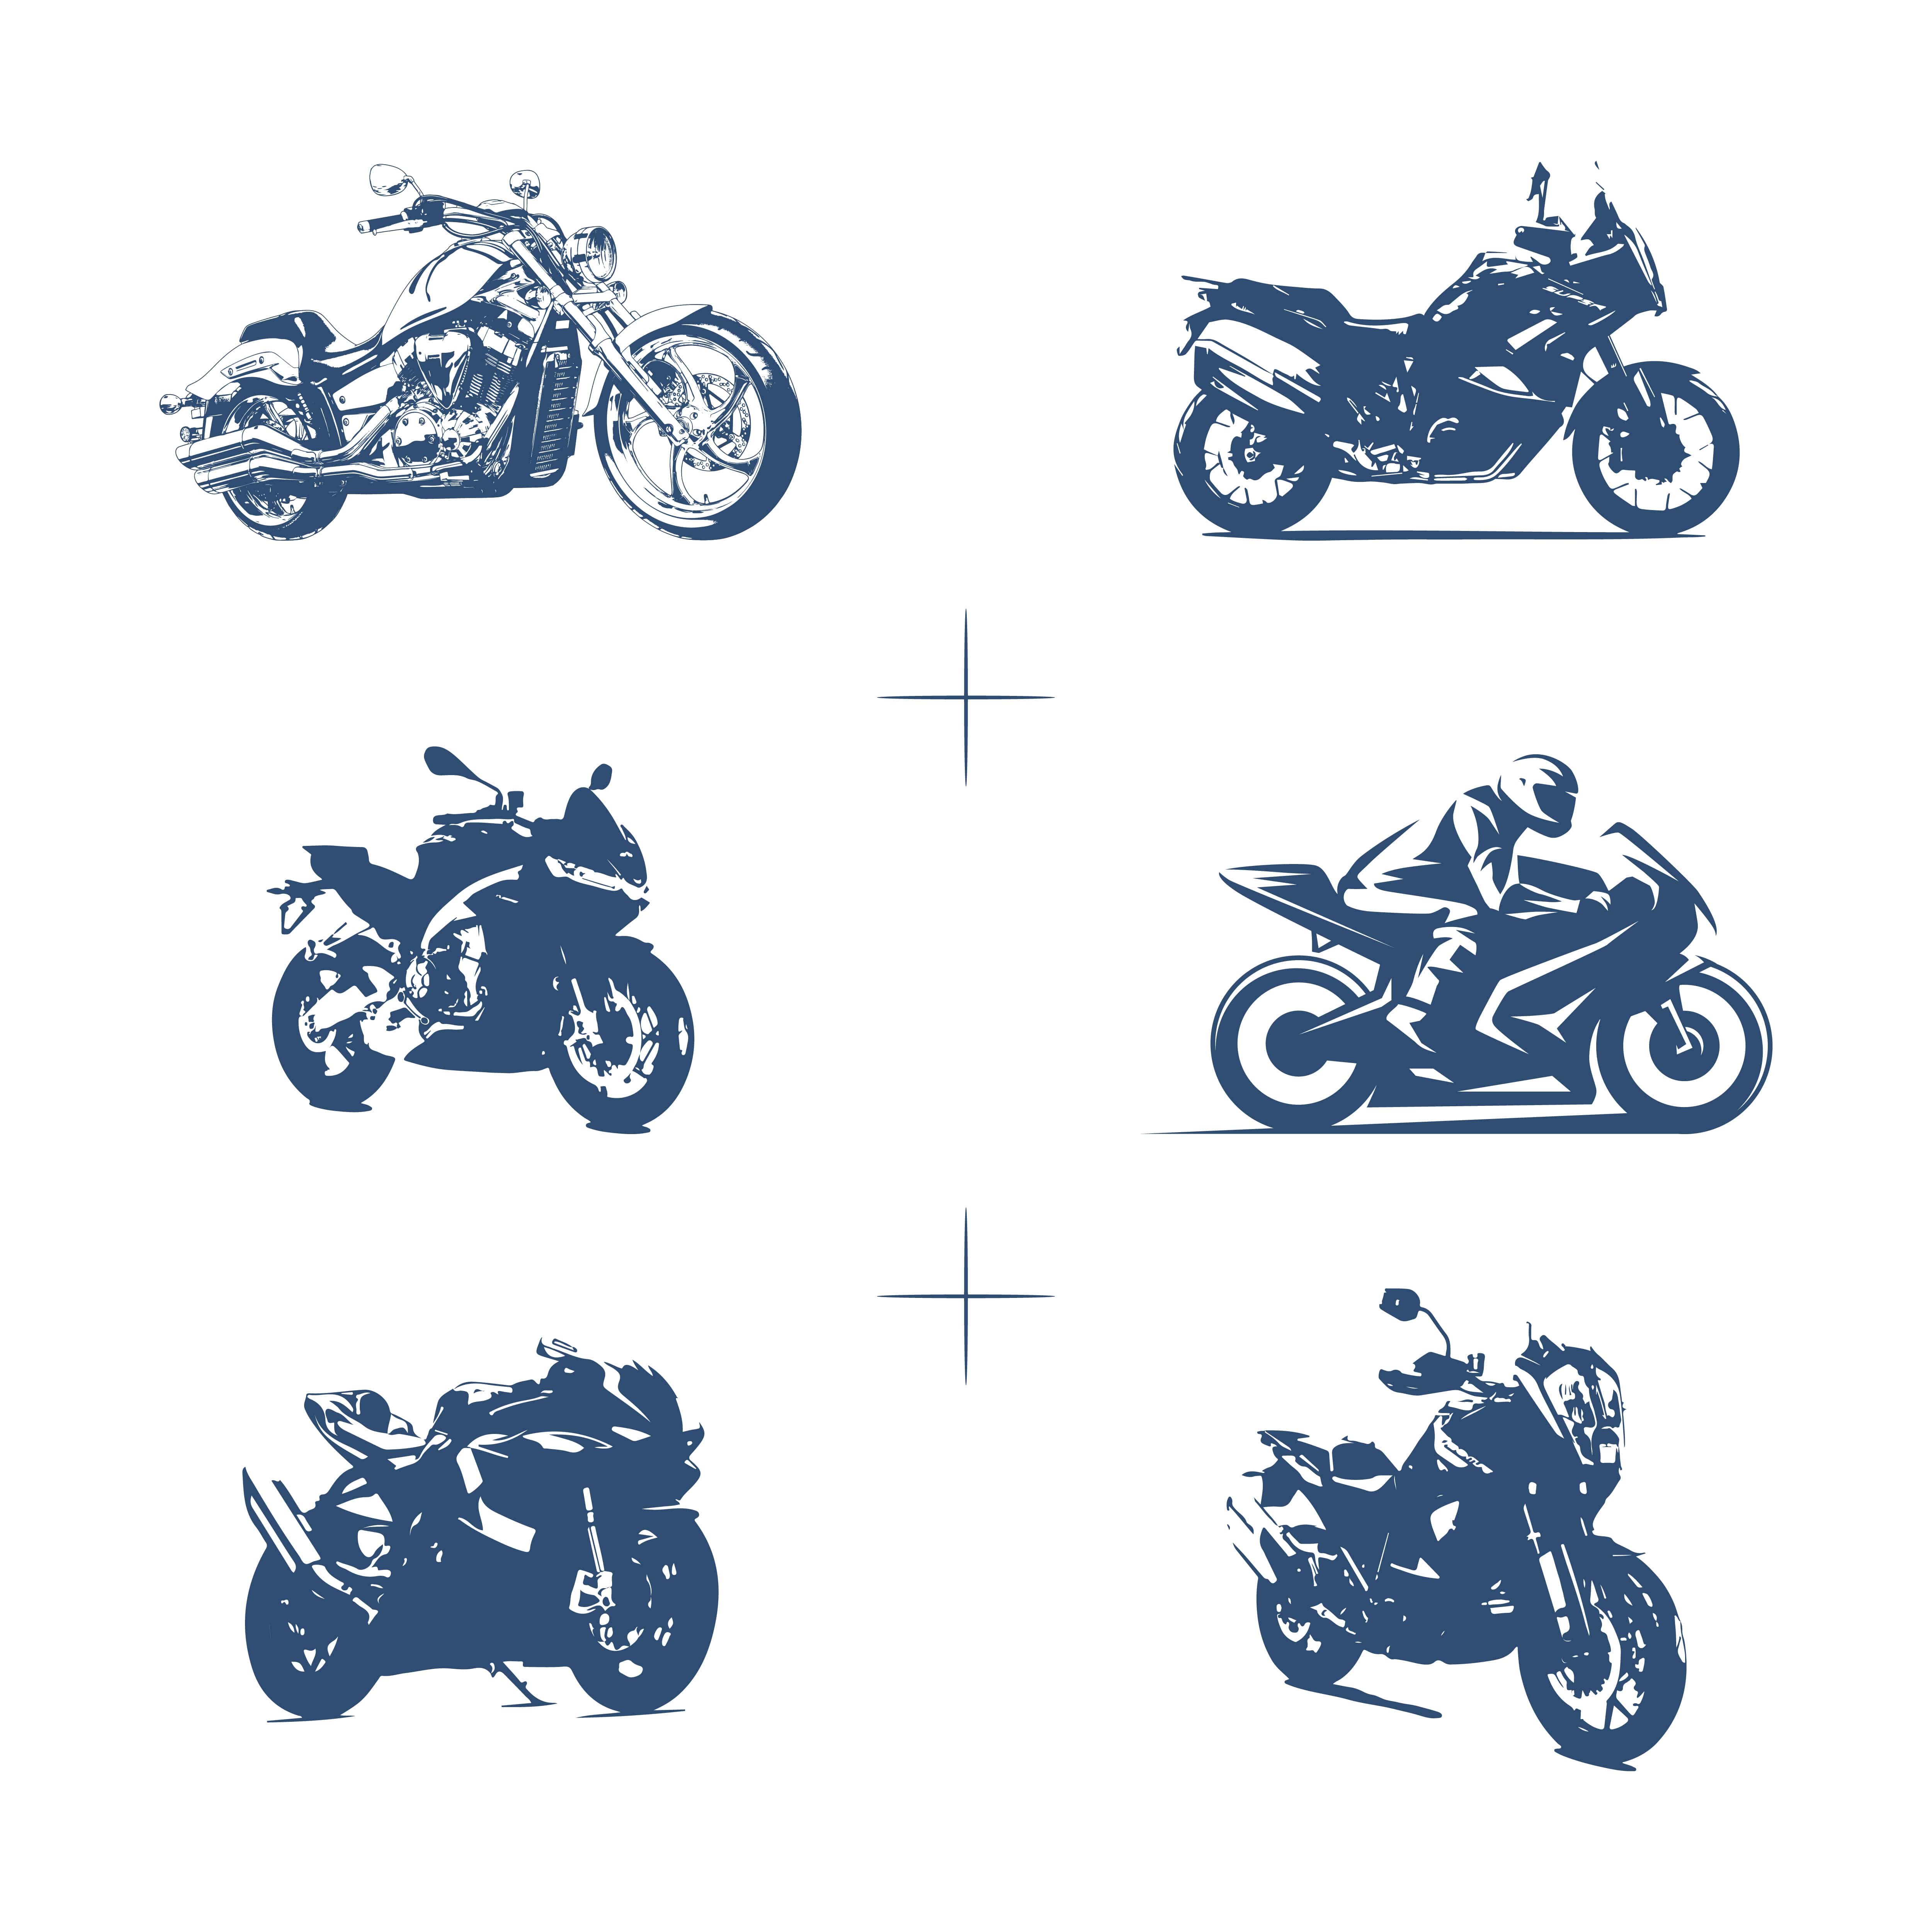 Four different types of motorcycles on a white background.